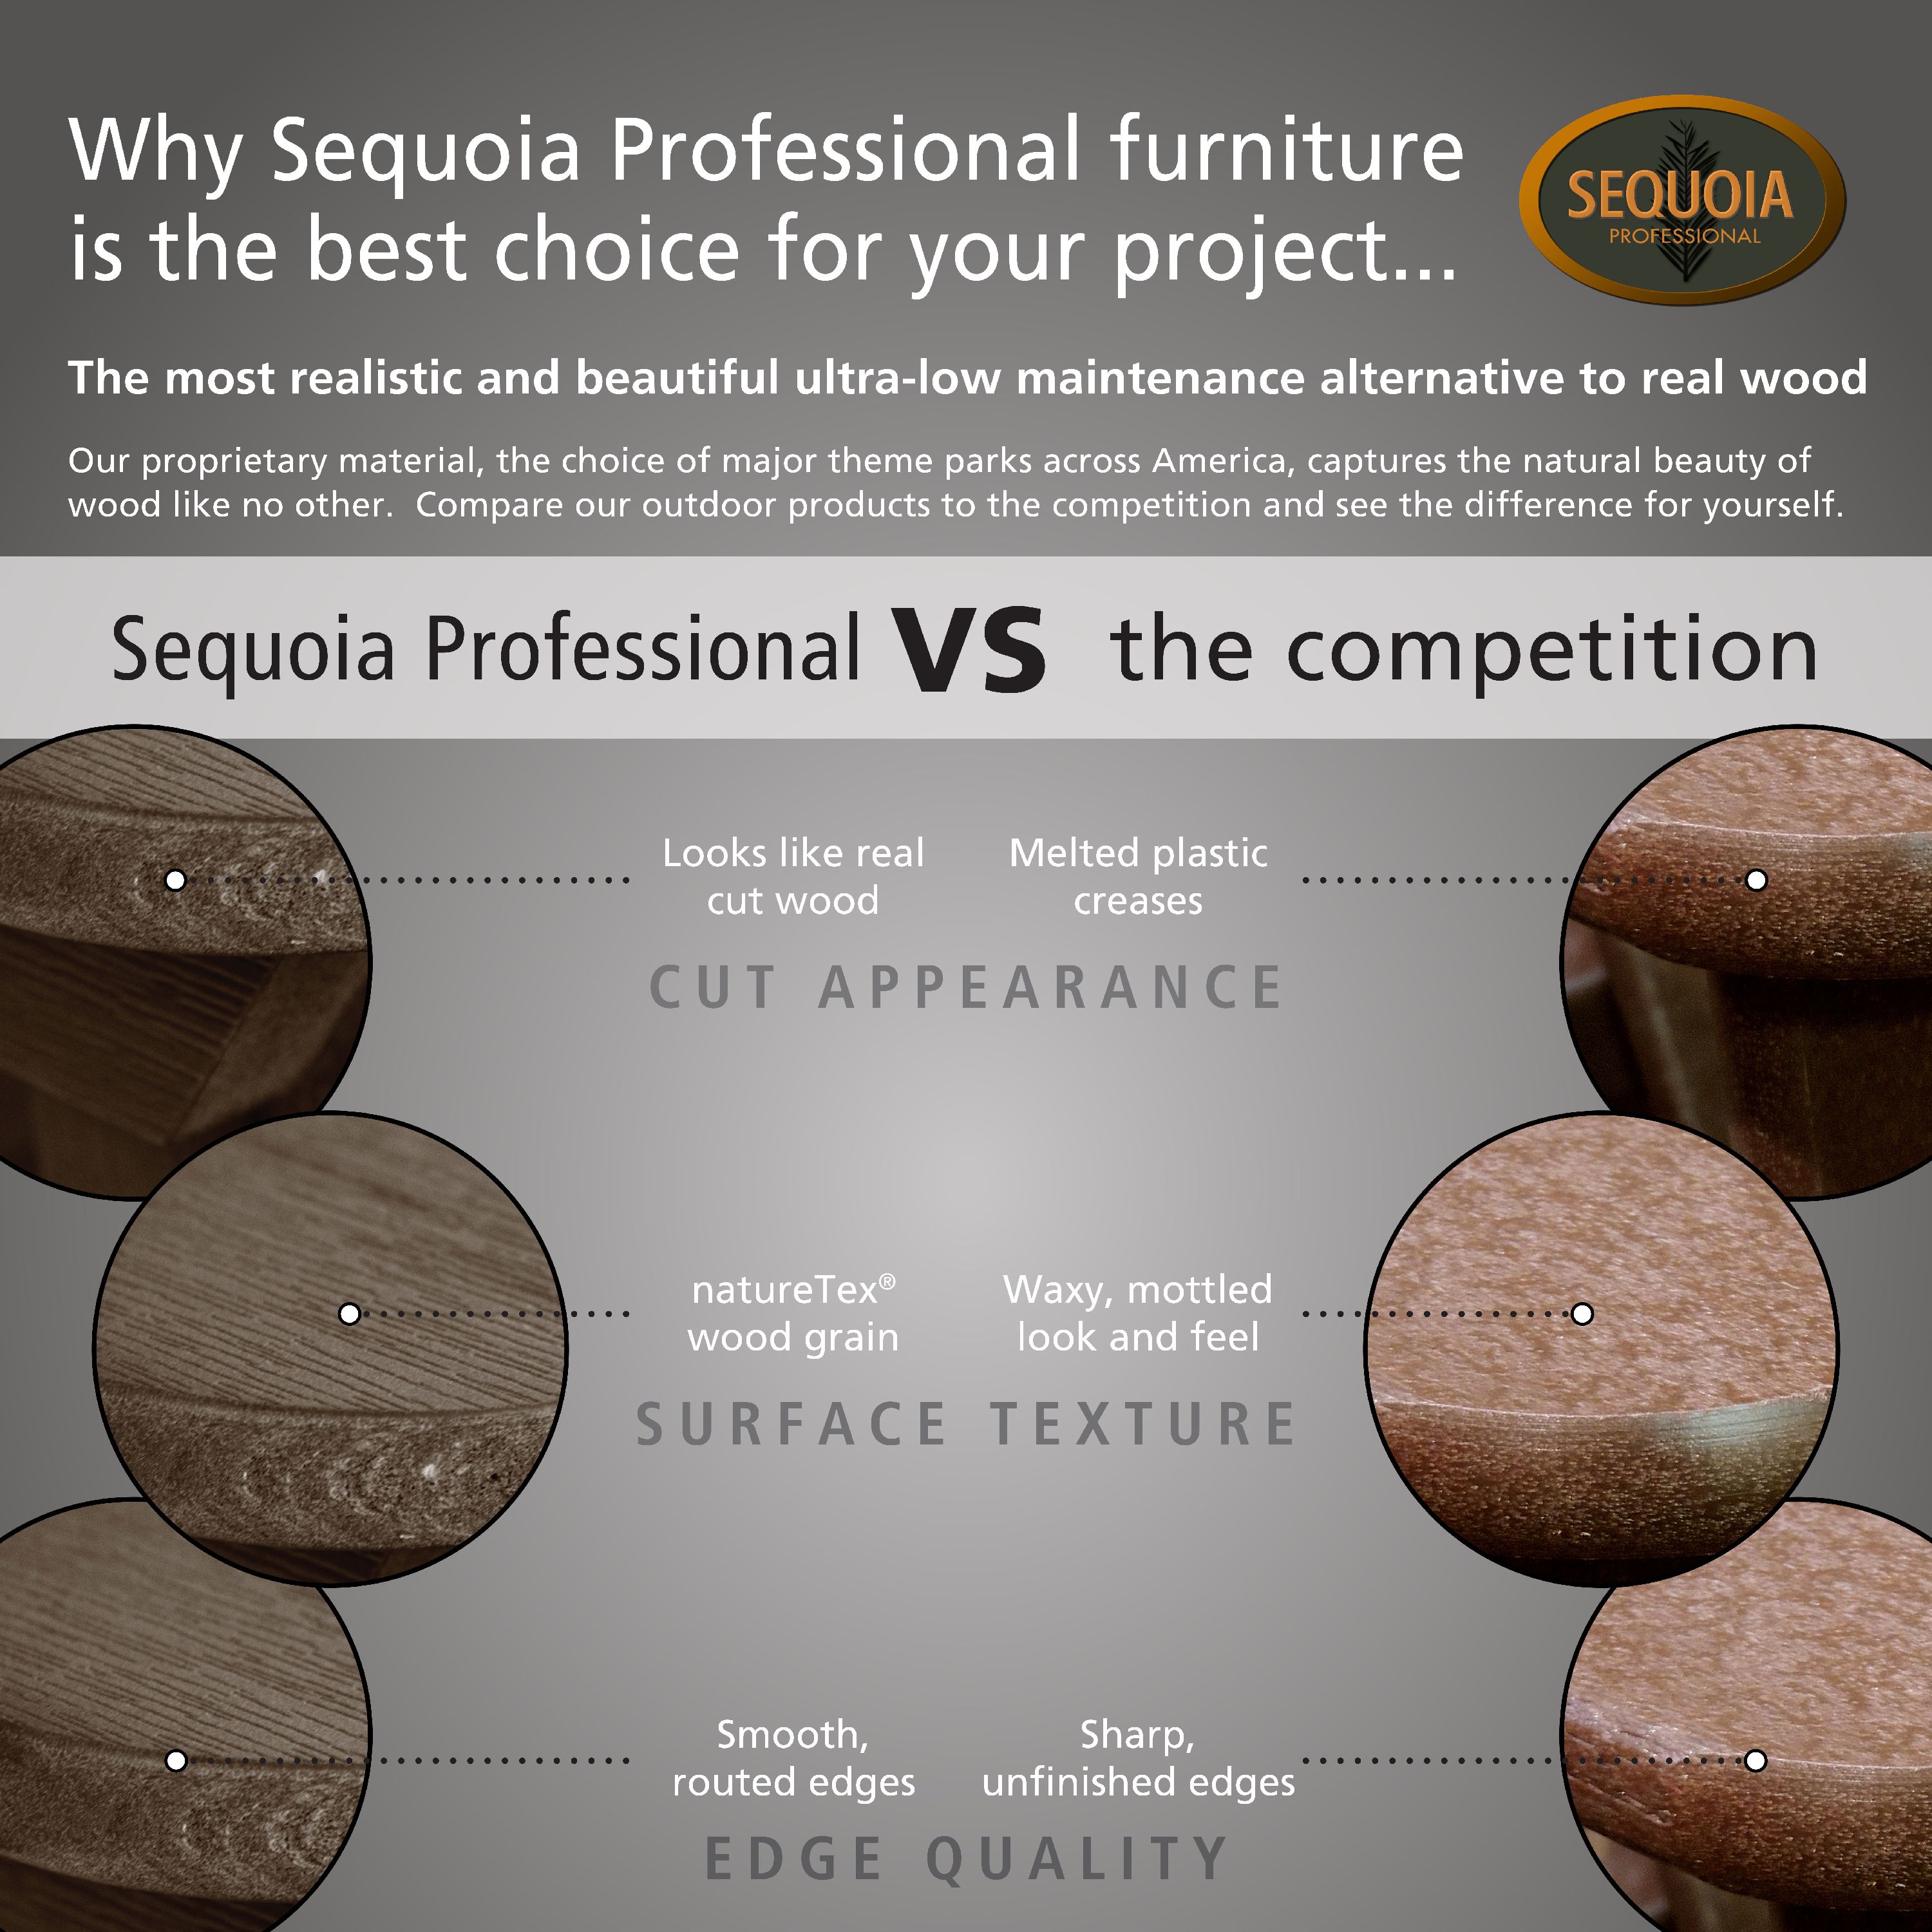 The Sequoia Professional Commercial Grade Springville Lounge Chair - image 4 of 4